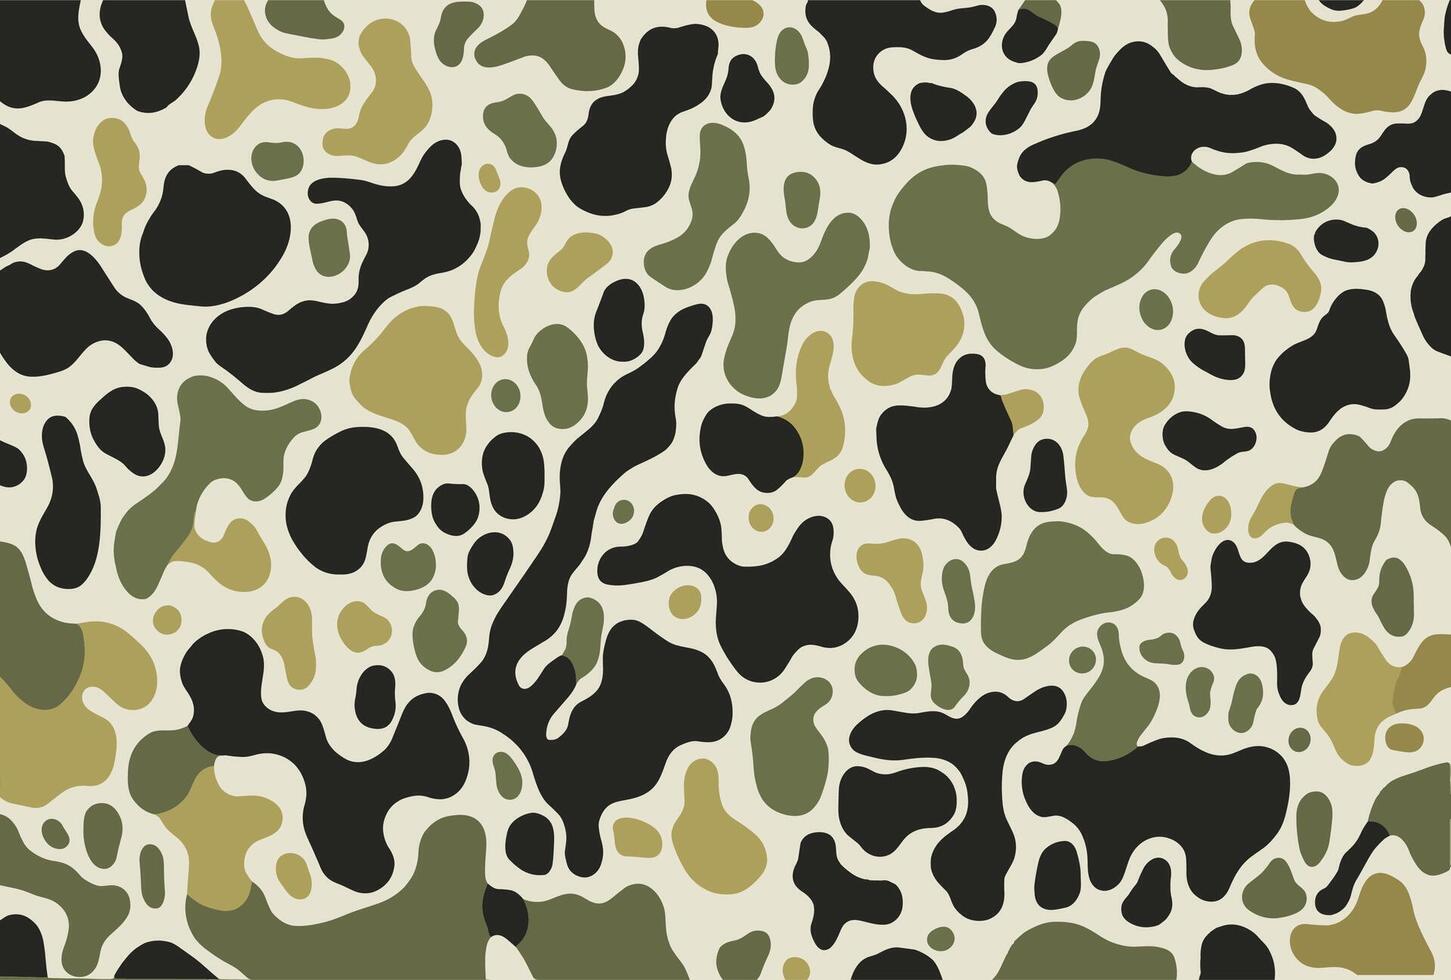 White, Black, Green, and Brown Print With Abstract Shapes, in the Style of Irregular Organic Forms, Light Green and Dark Gray, Nature-Inspired Camouflage, Unmodulated Color, Mosaic Composition vector